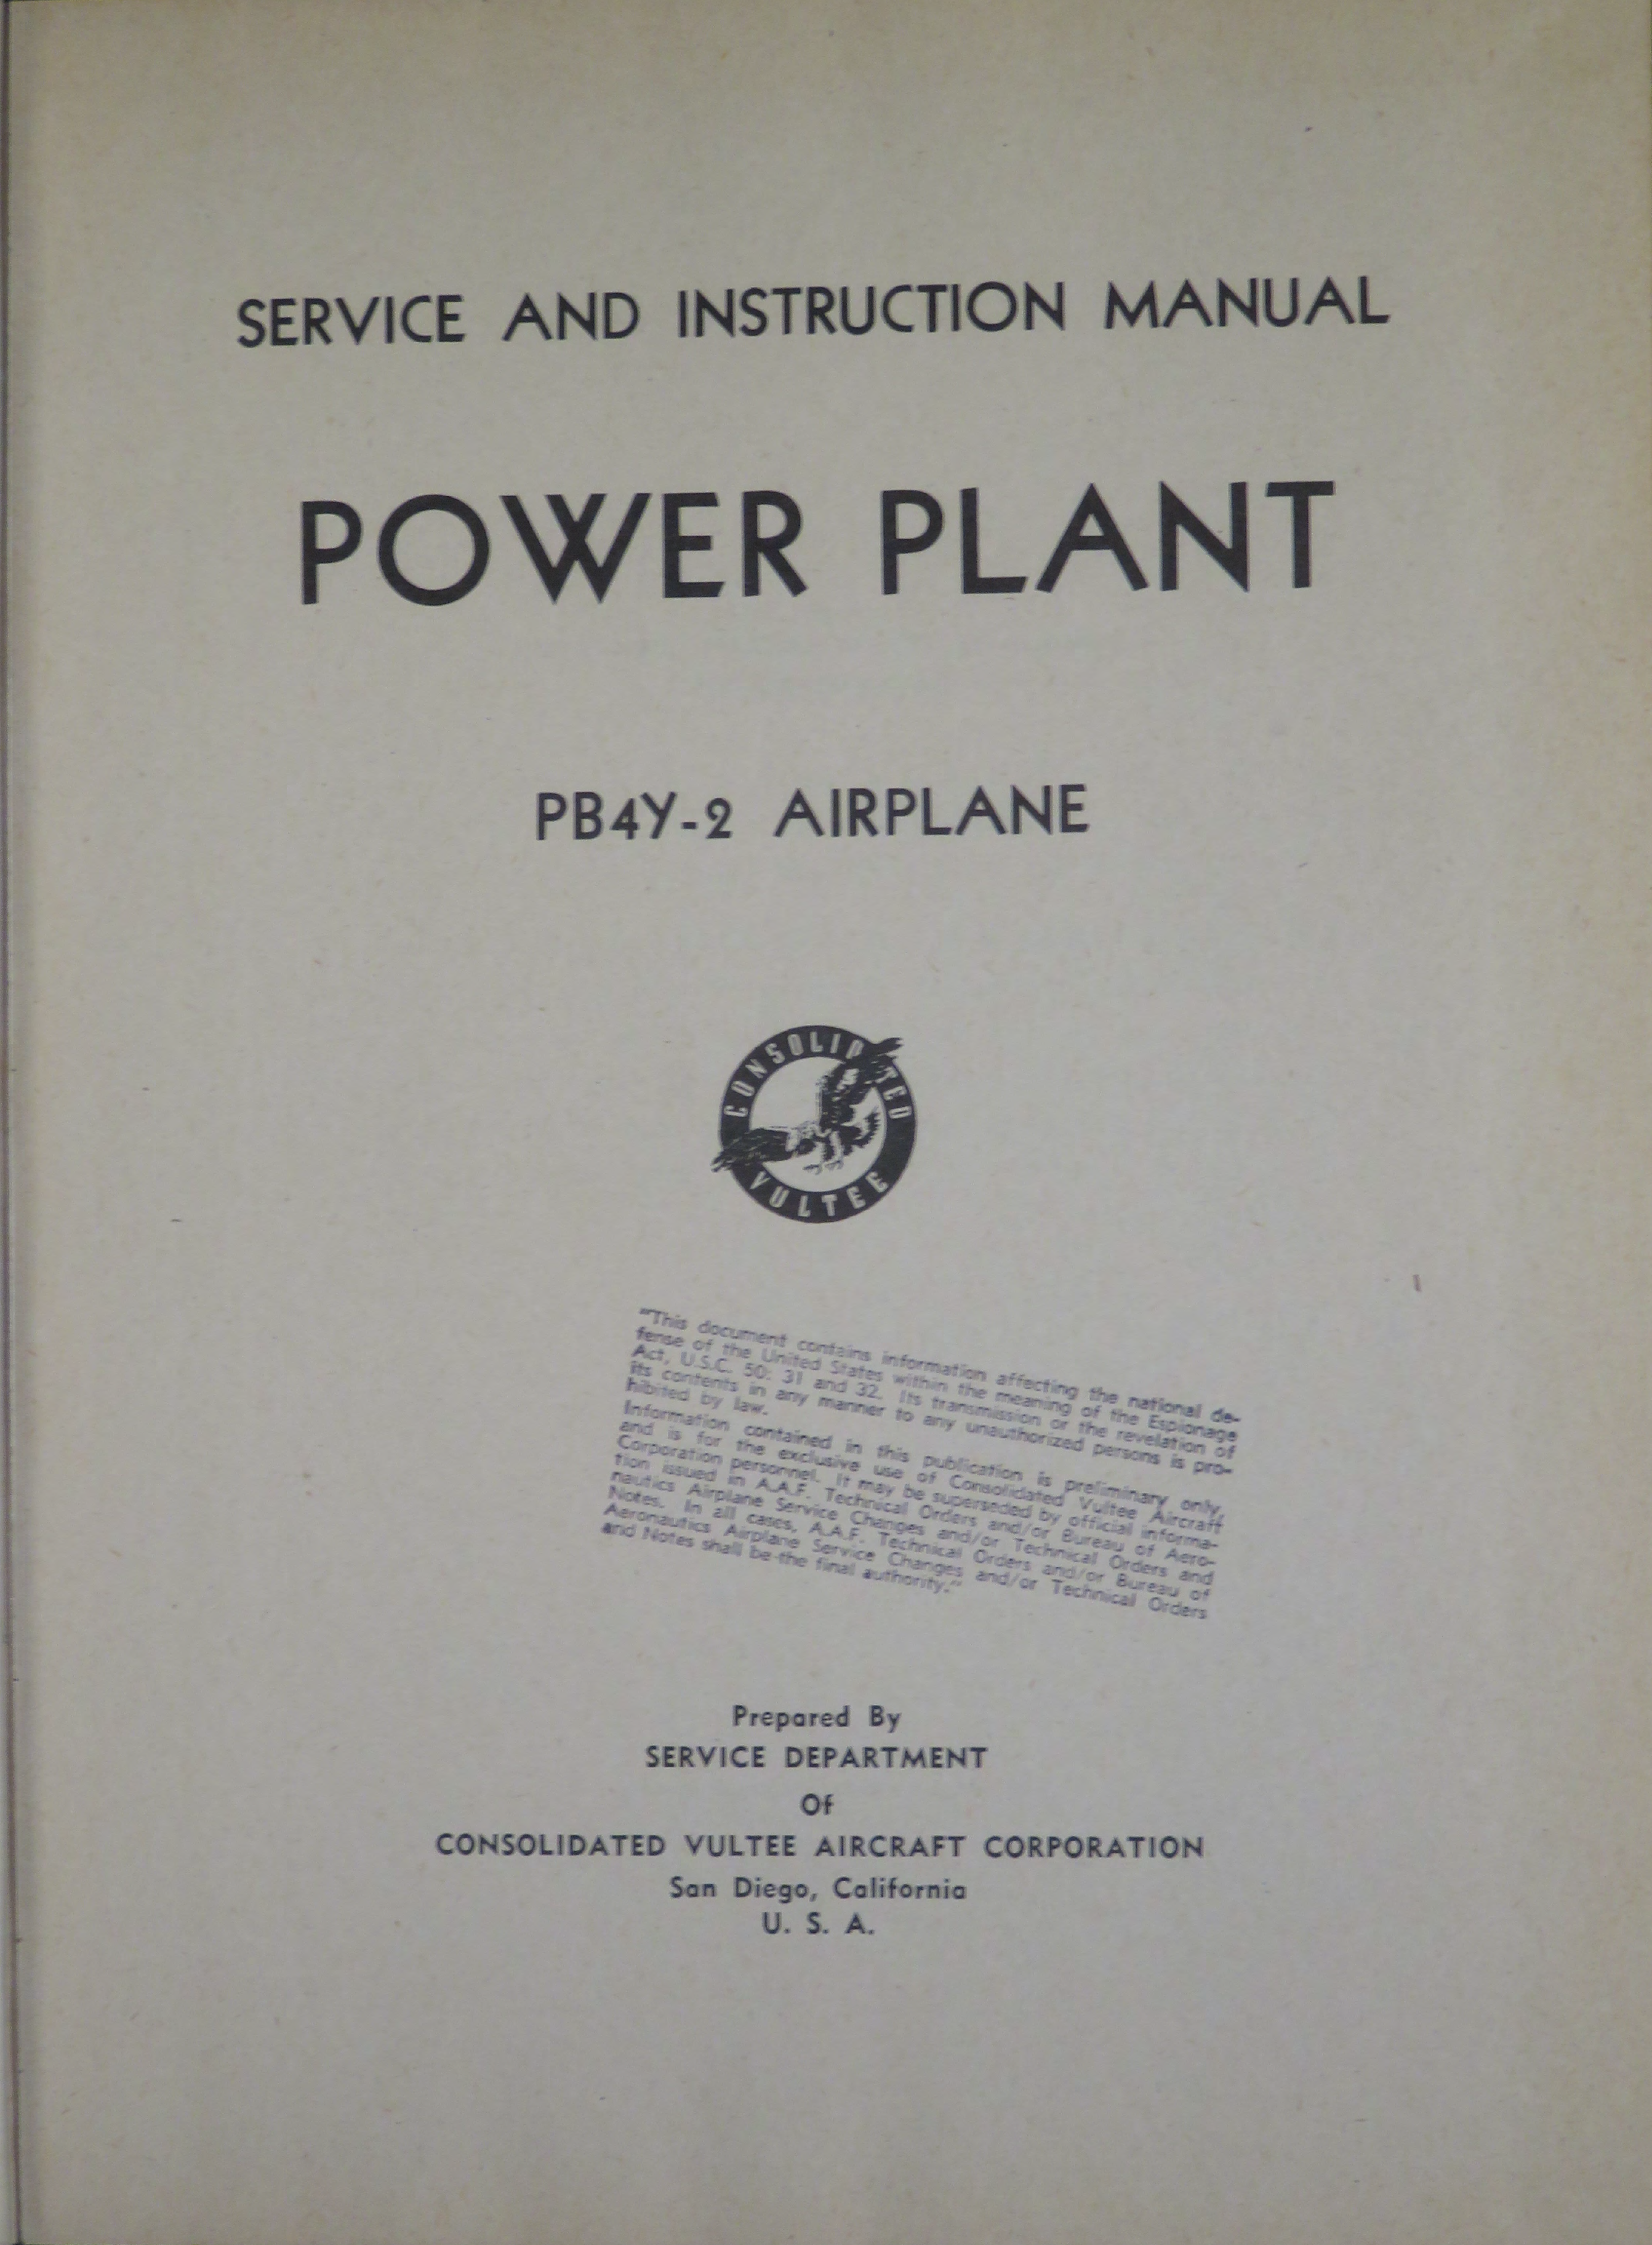 Sample page 5 from AirCorps Library document: Service and Instruction Manual - Powerplant for PB4Y-2 Airplane